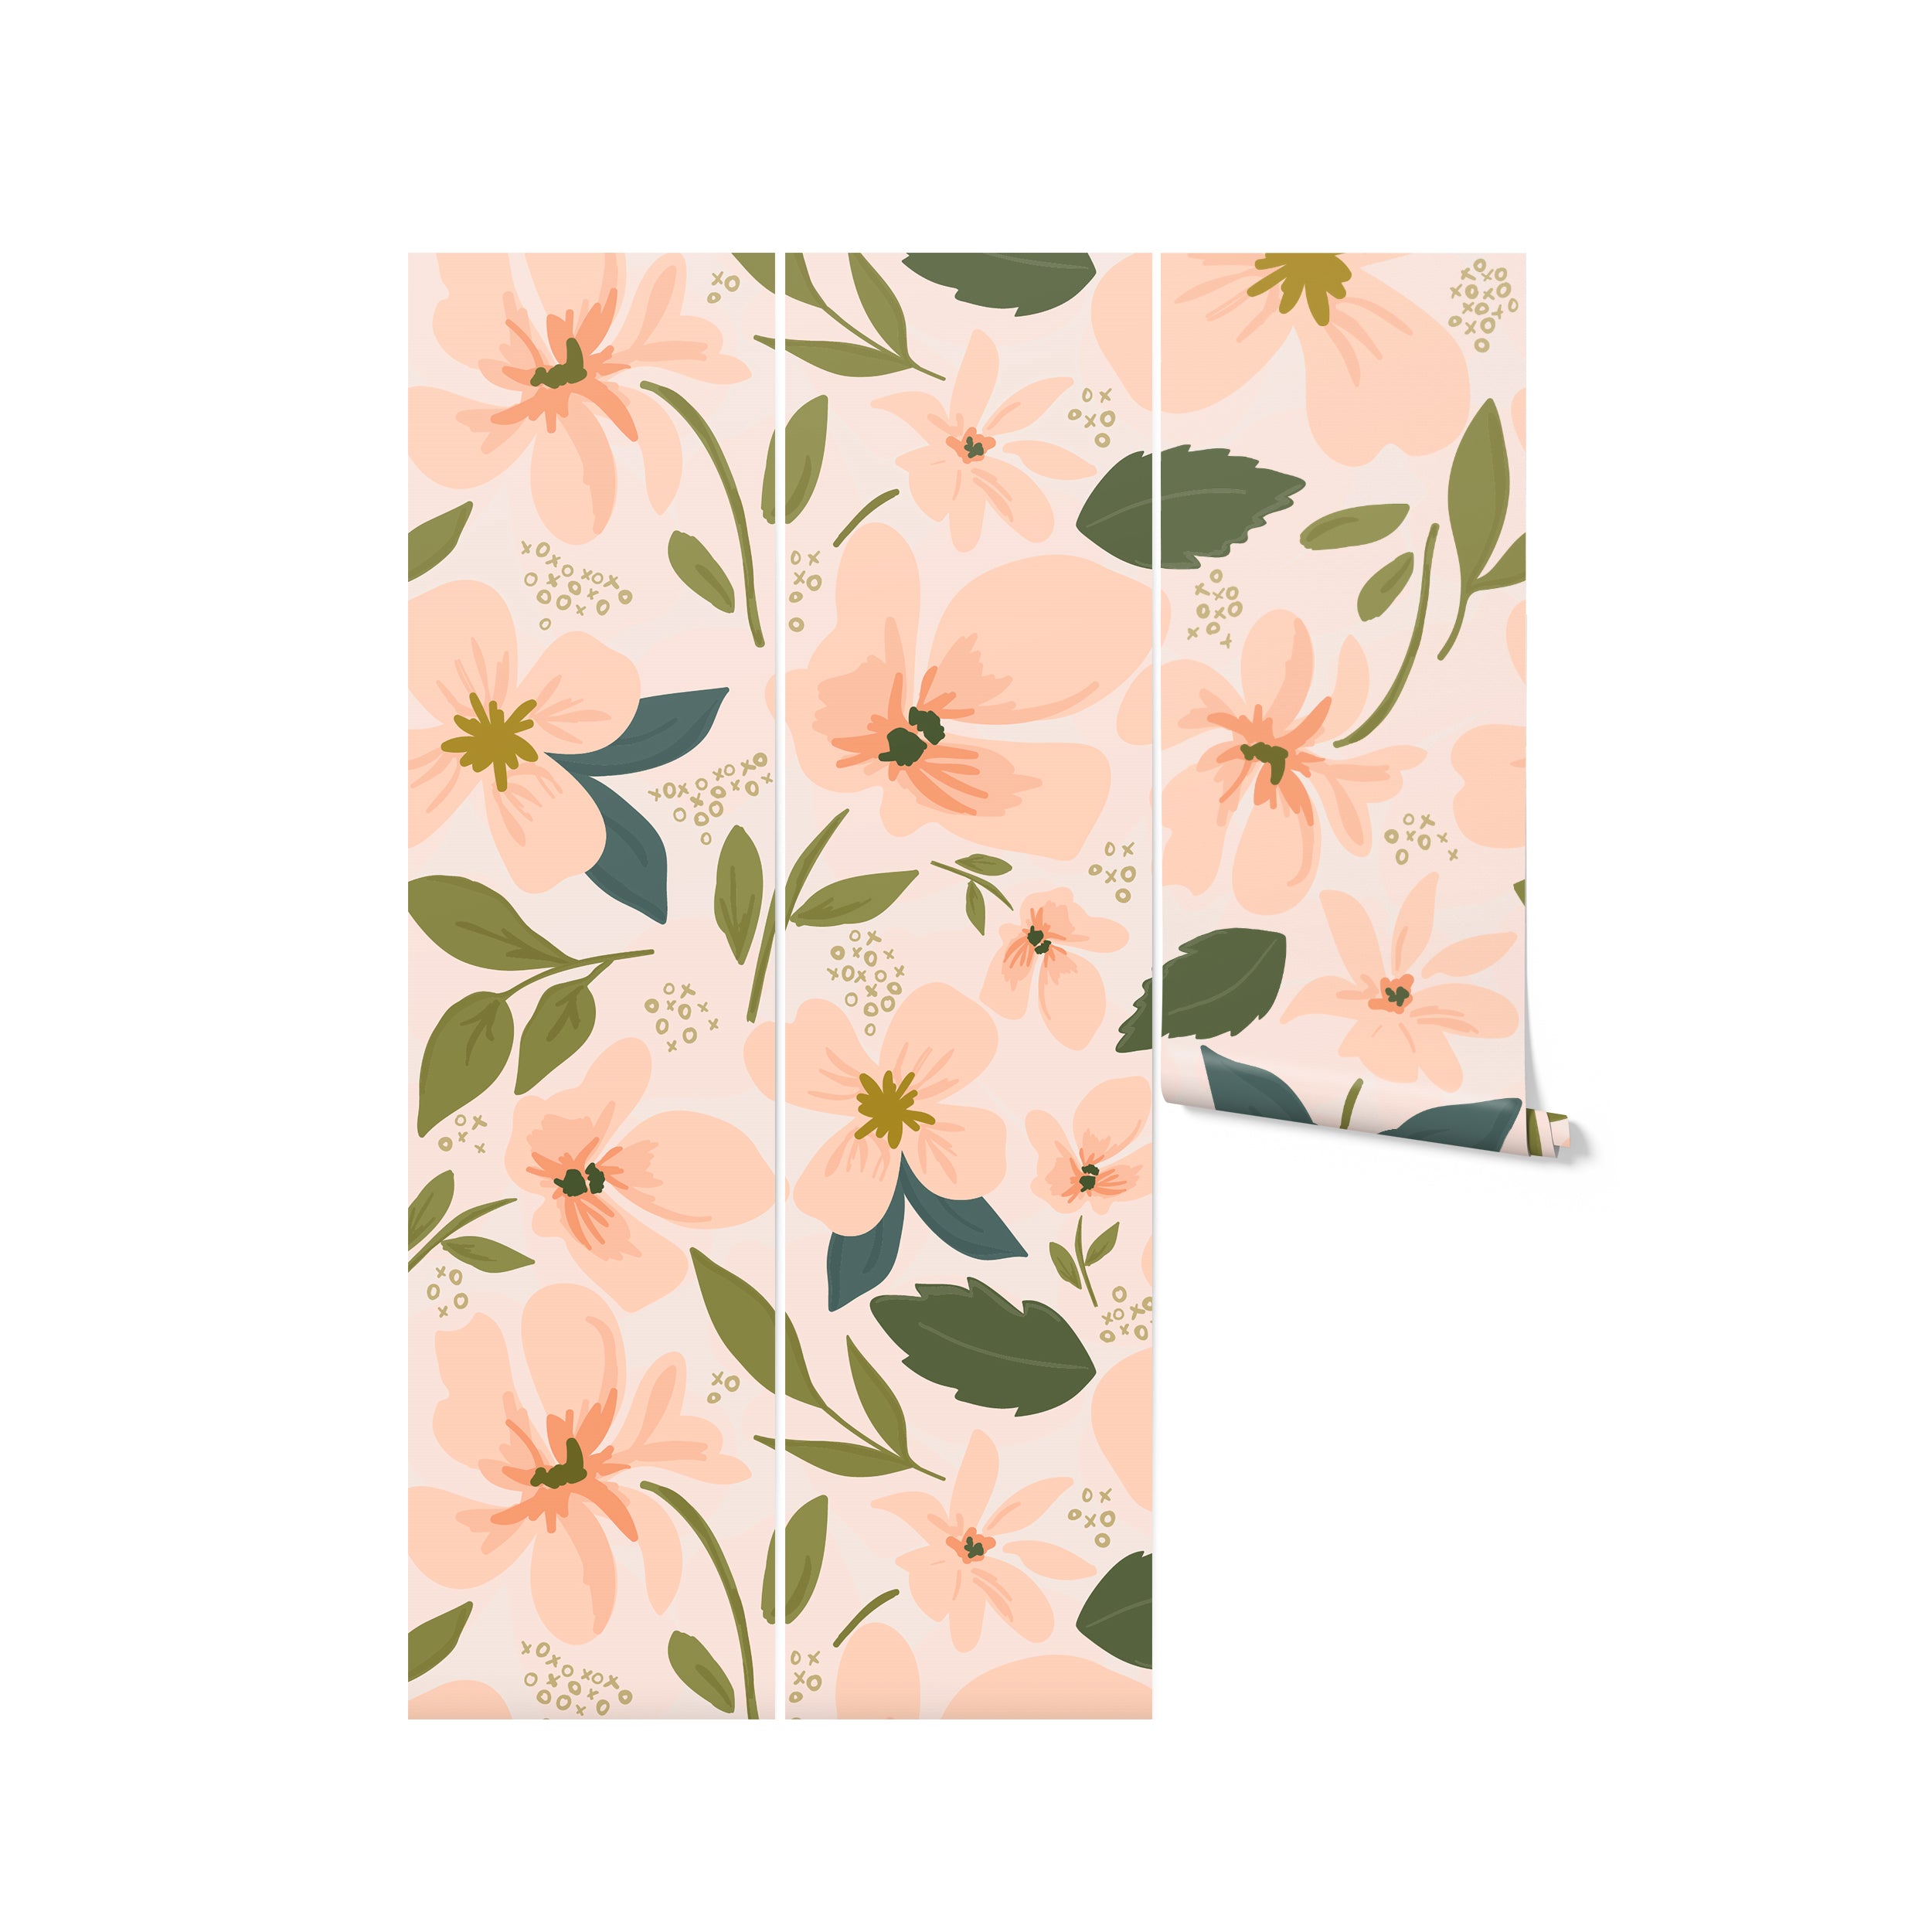 Rolled-up sample of peach floral wallpaper with large blossoms and green leaves on a light pink background